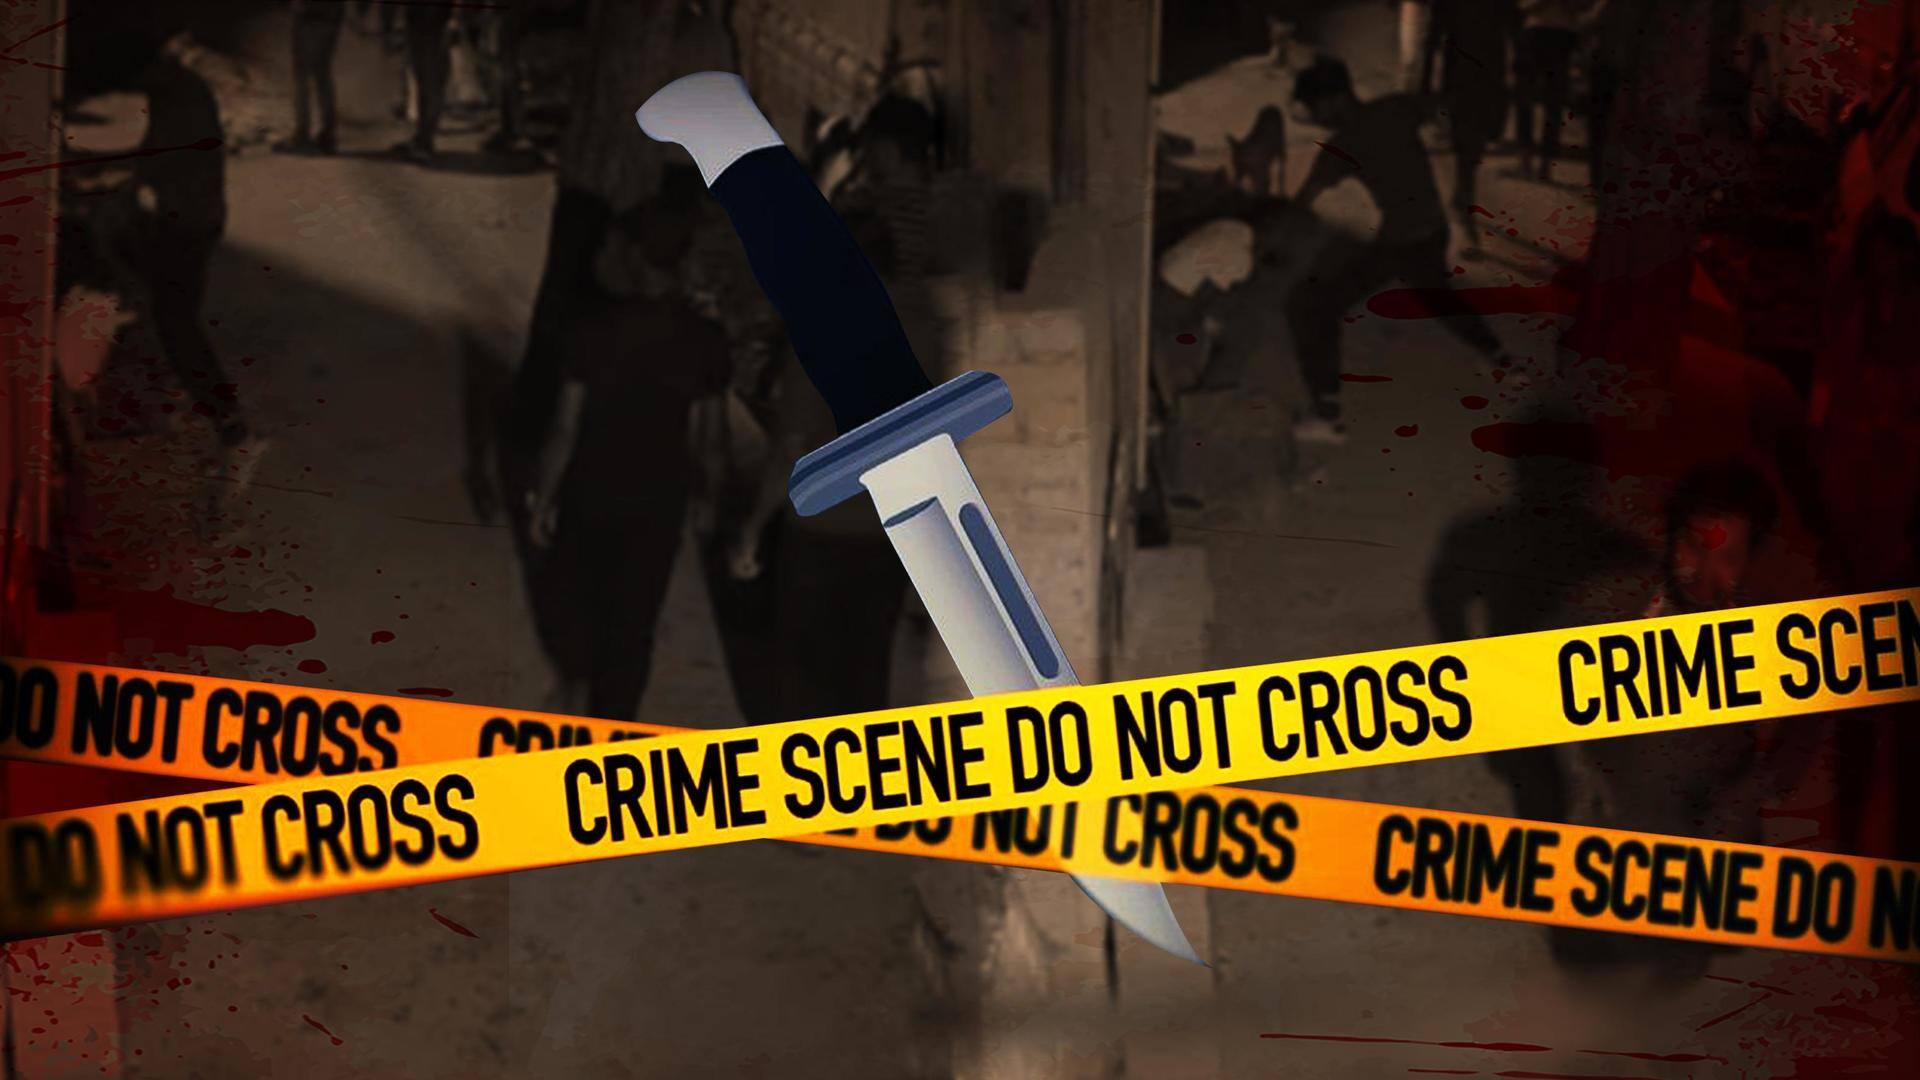 Delhi: Man stabs 16-year-old girlfriend 20 times to death, arrested